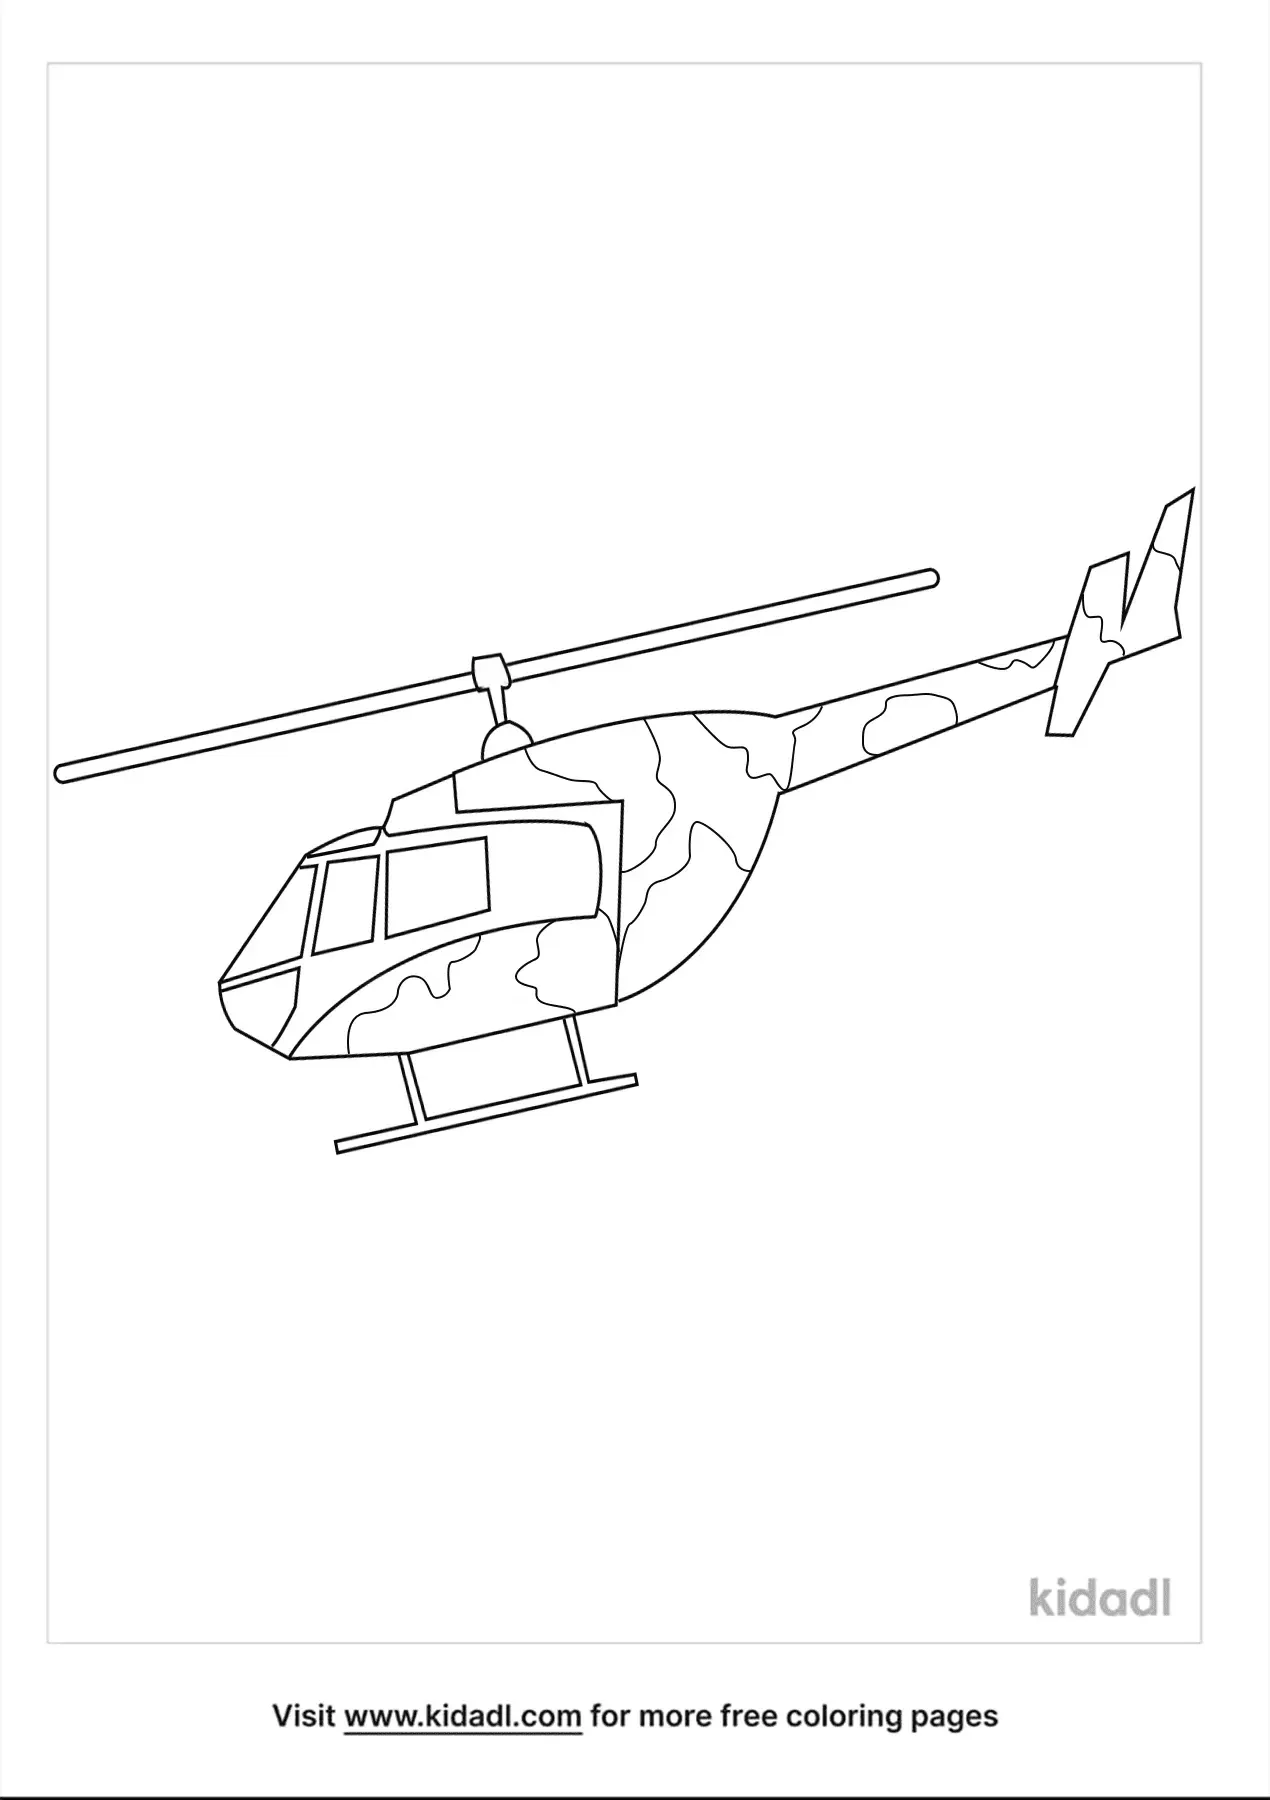 Page 3 | Helicopter Drawing Images - Free Download on Freepik